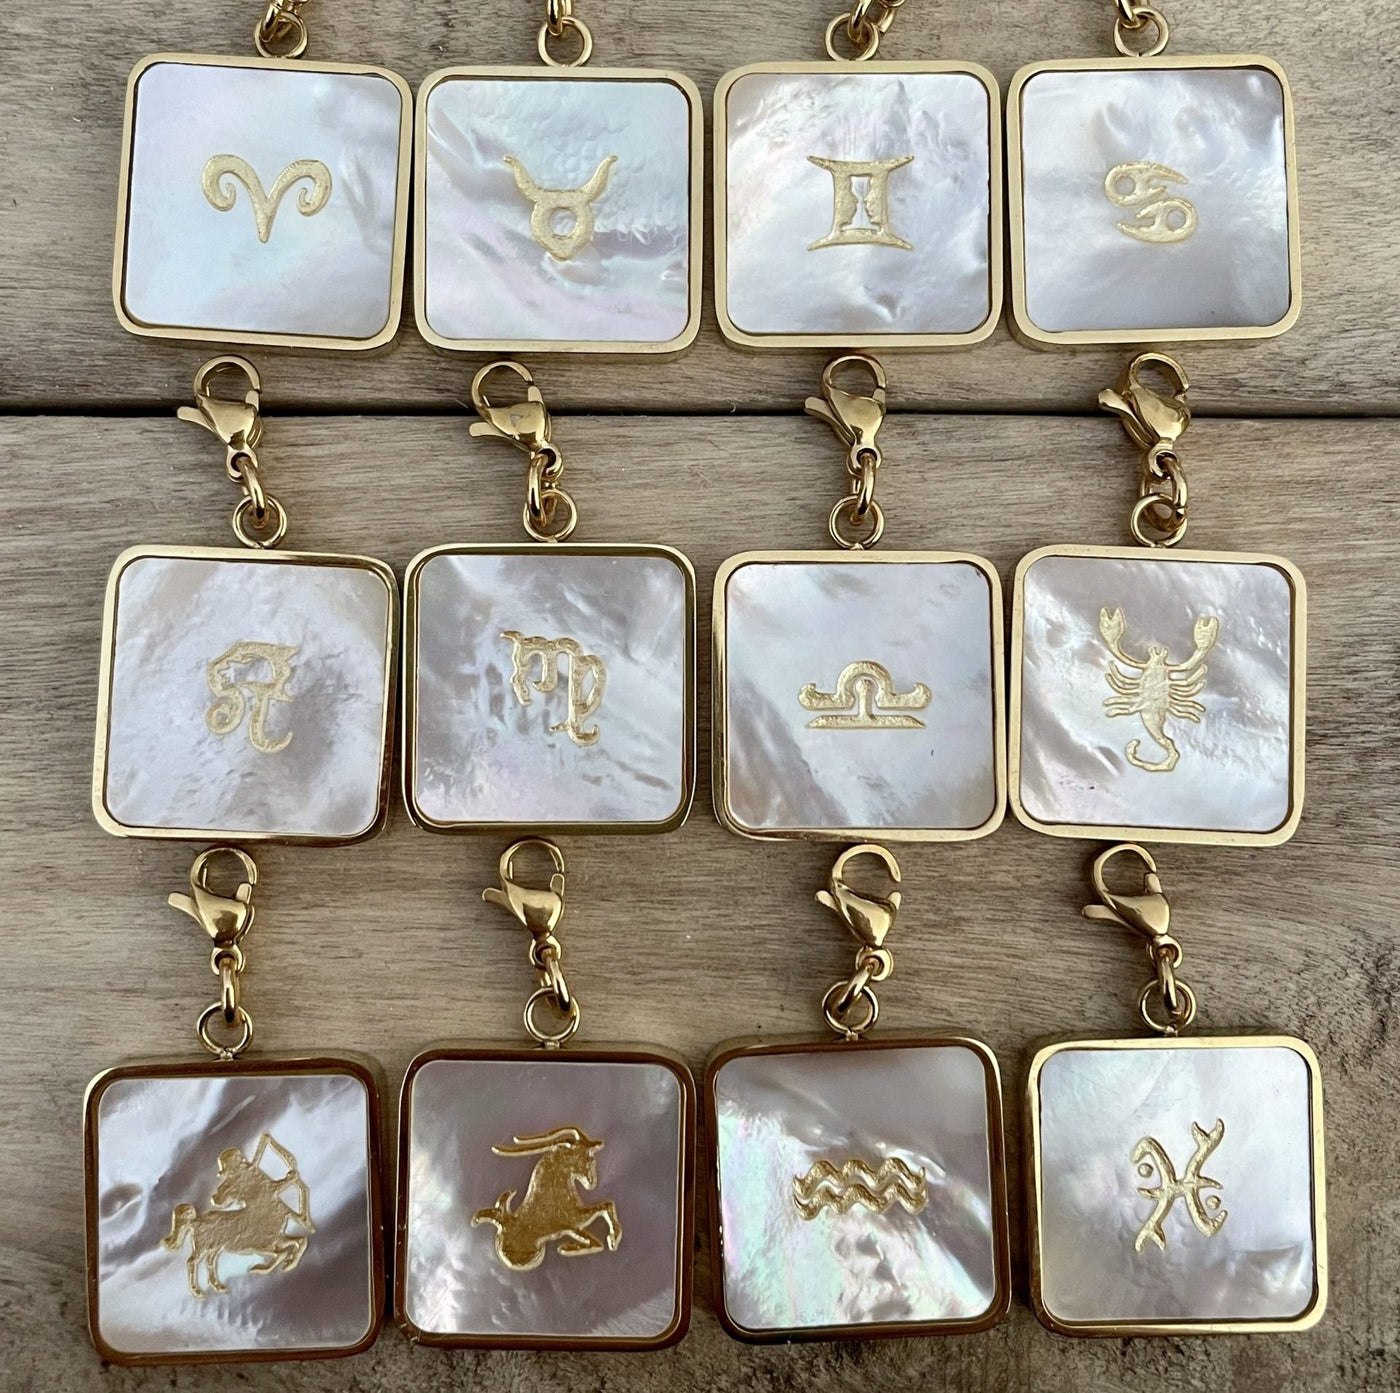 Golden ASTROLOGICAL SIGN Mother-of-Pearl Charm